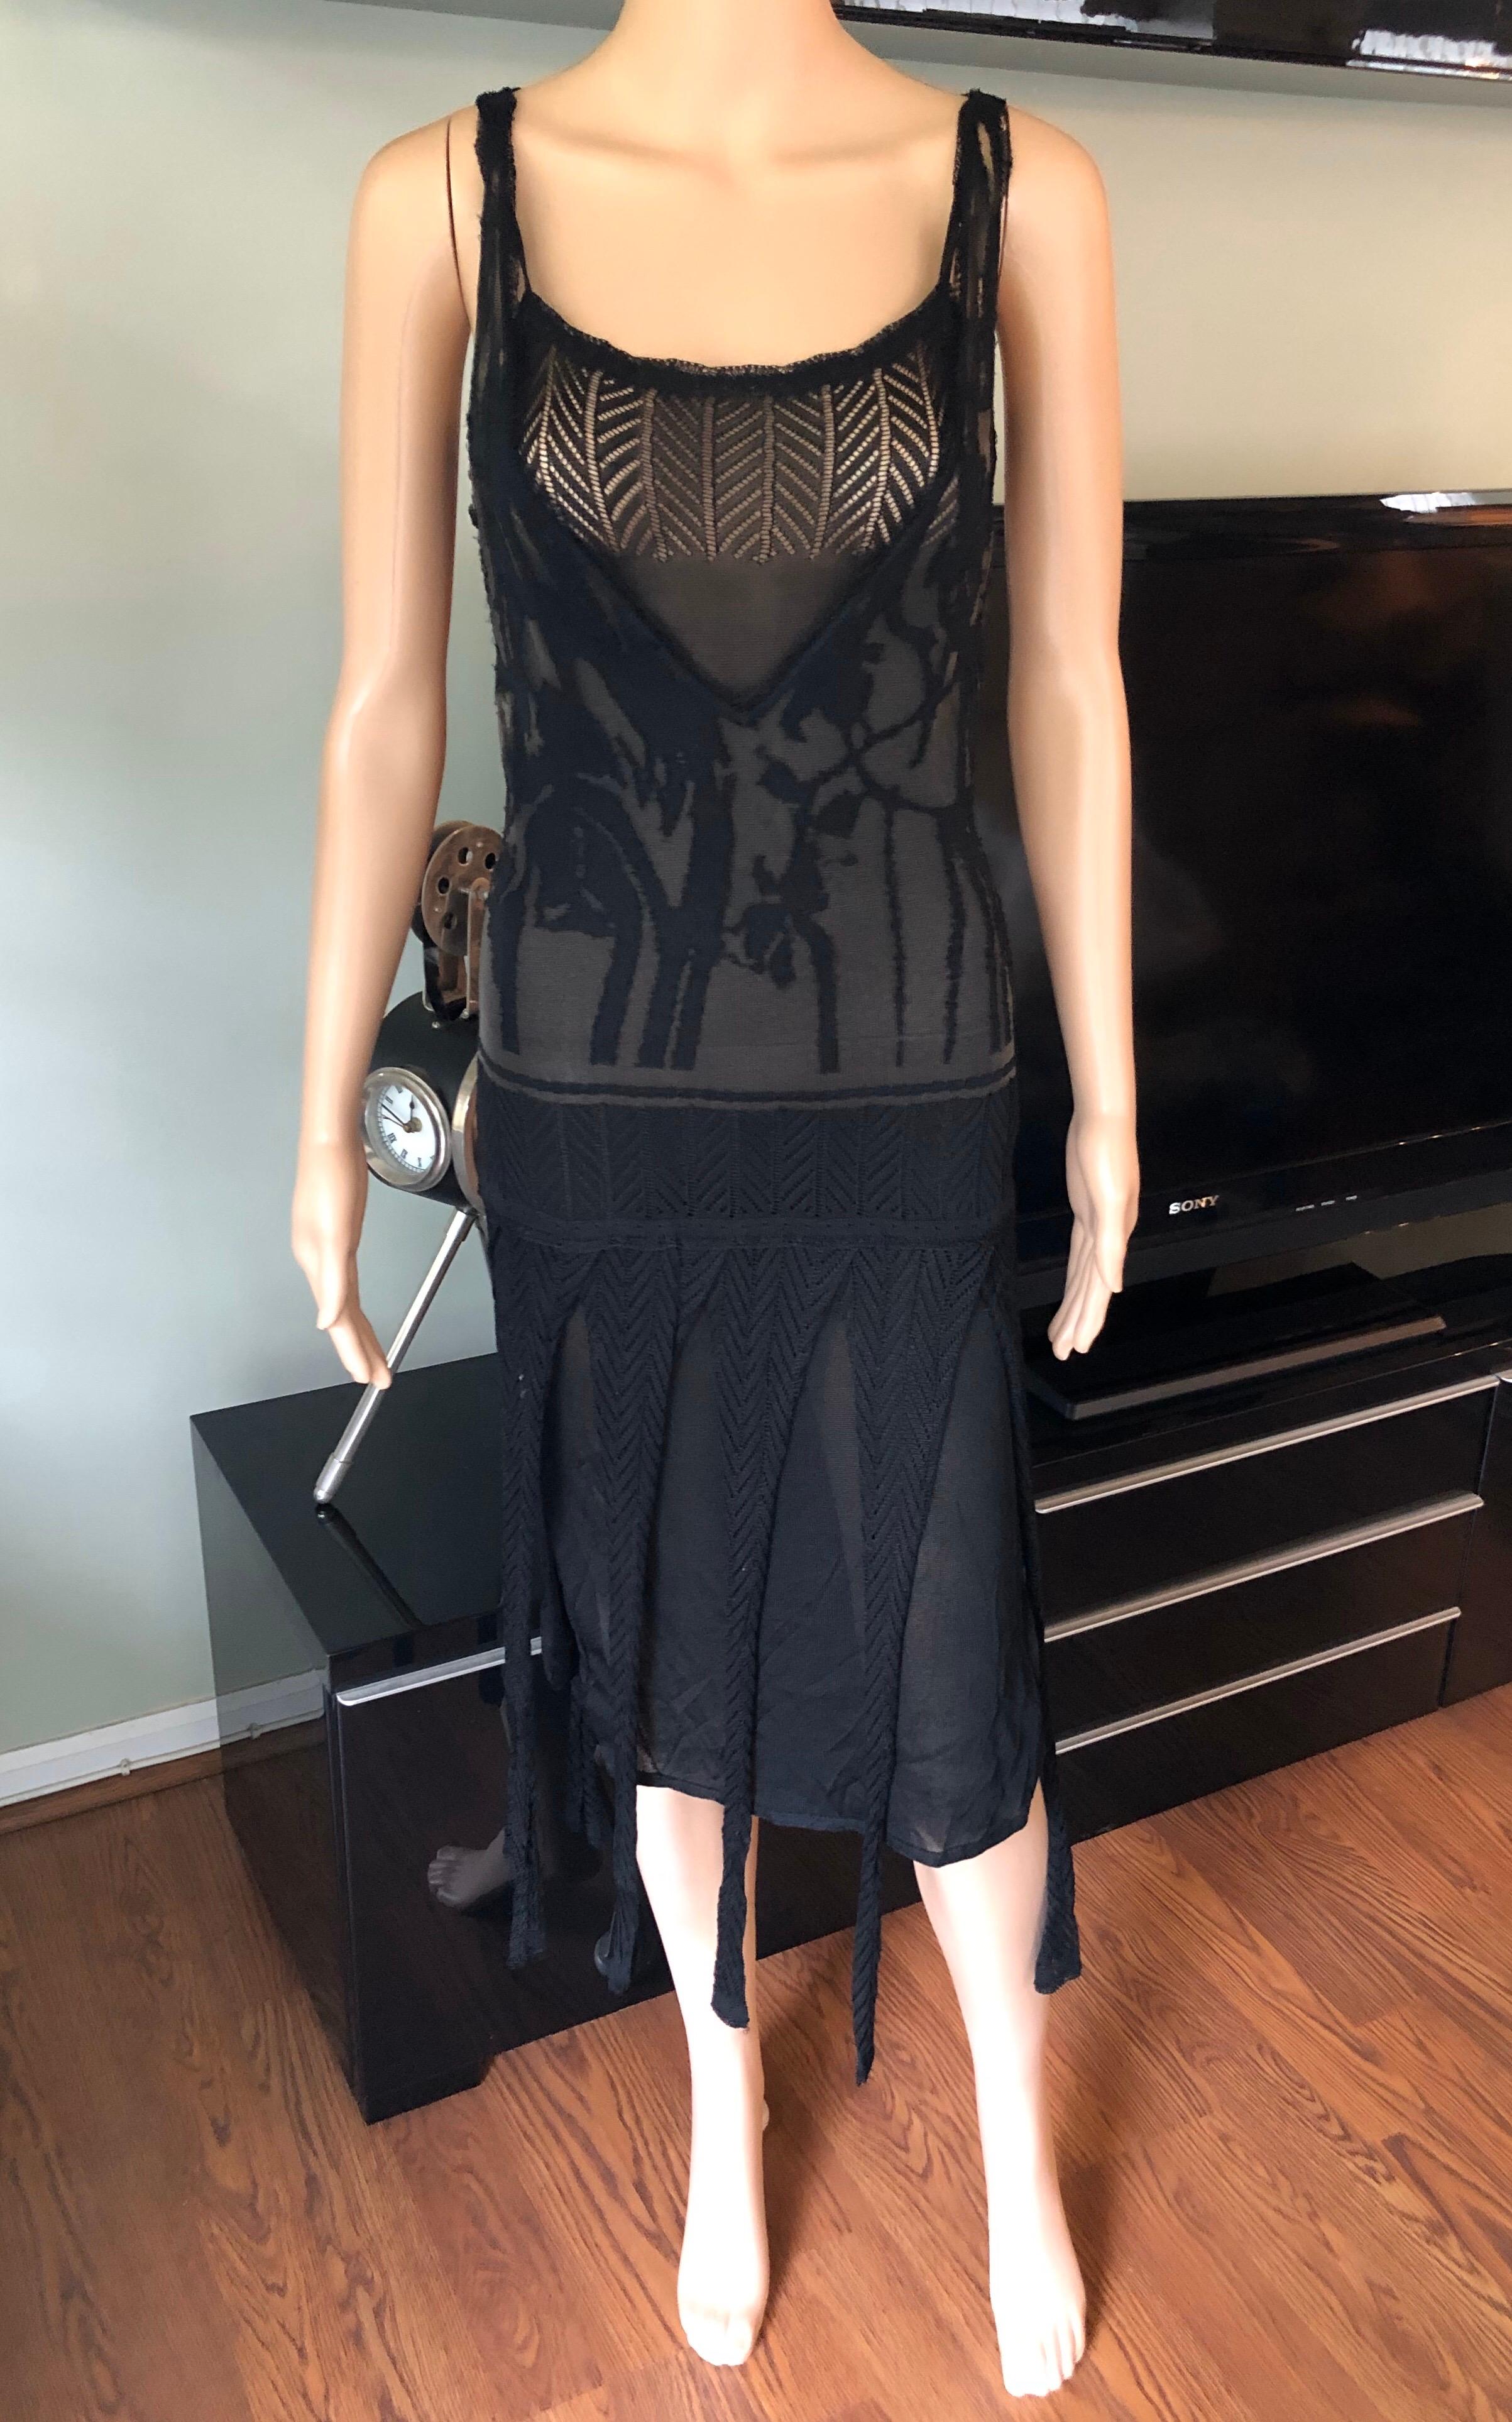 Christian Lacroix Vintage Semi-Sheer Crochet Mesh Knit Fringed Black Dress M

Christian Lacroix  2 Piece knit dress with sheer plunging neckline, fringed trims and dual vents at hem.
